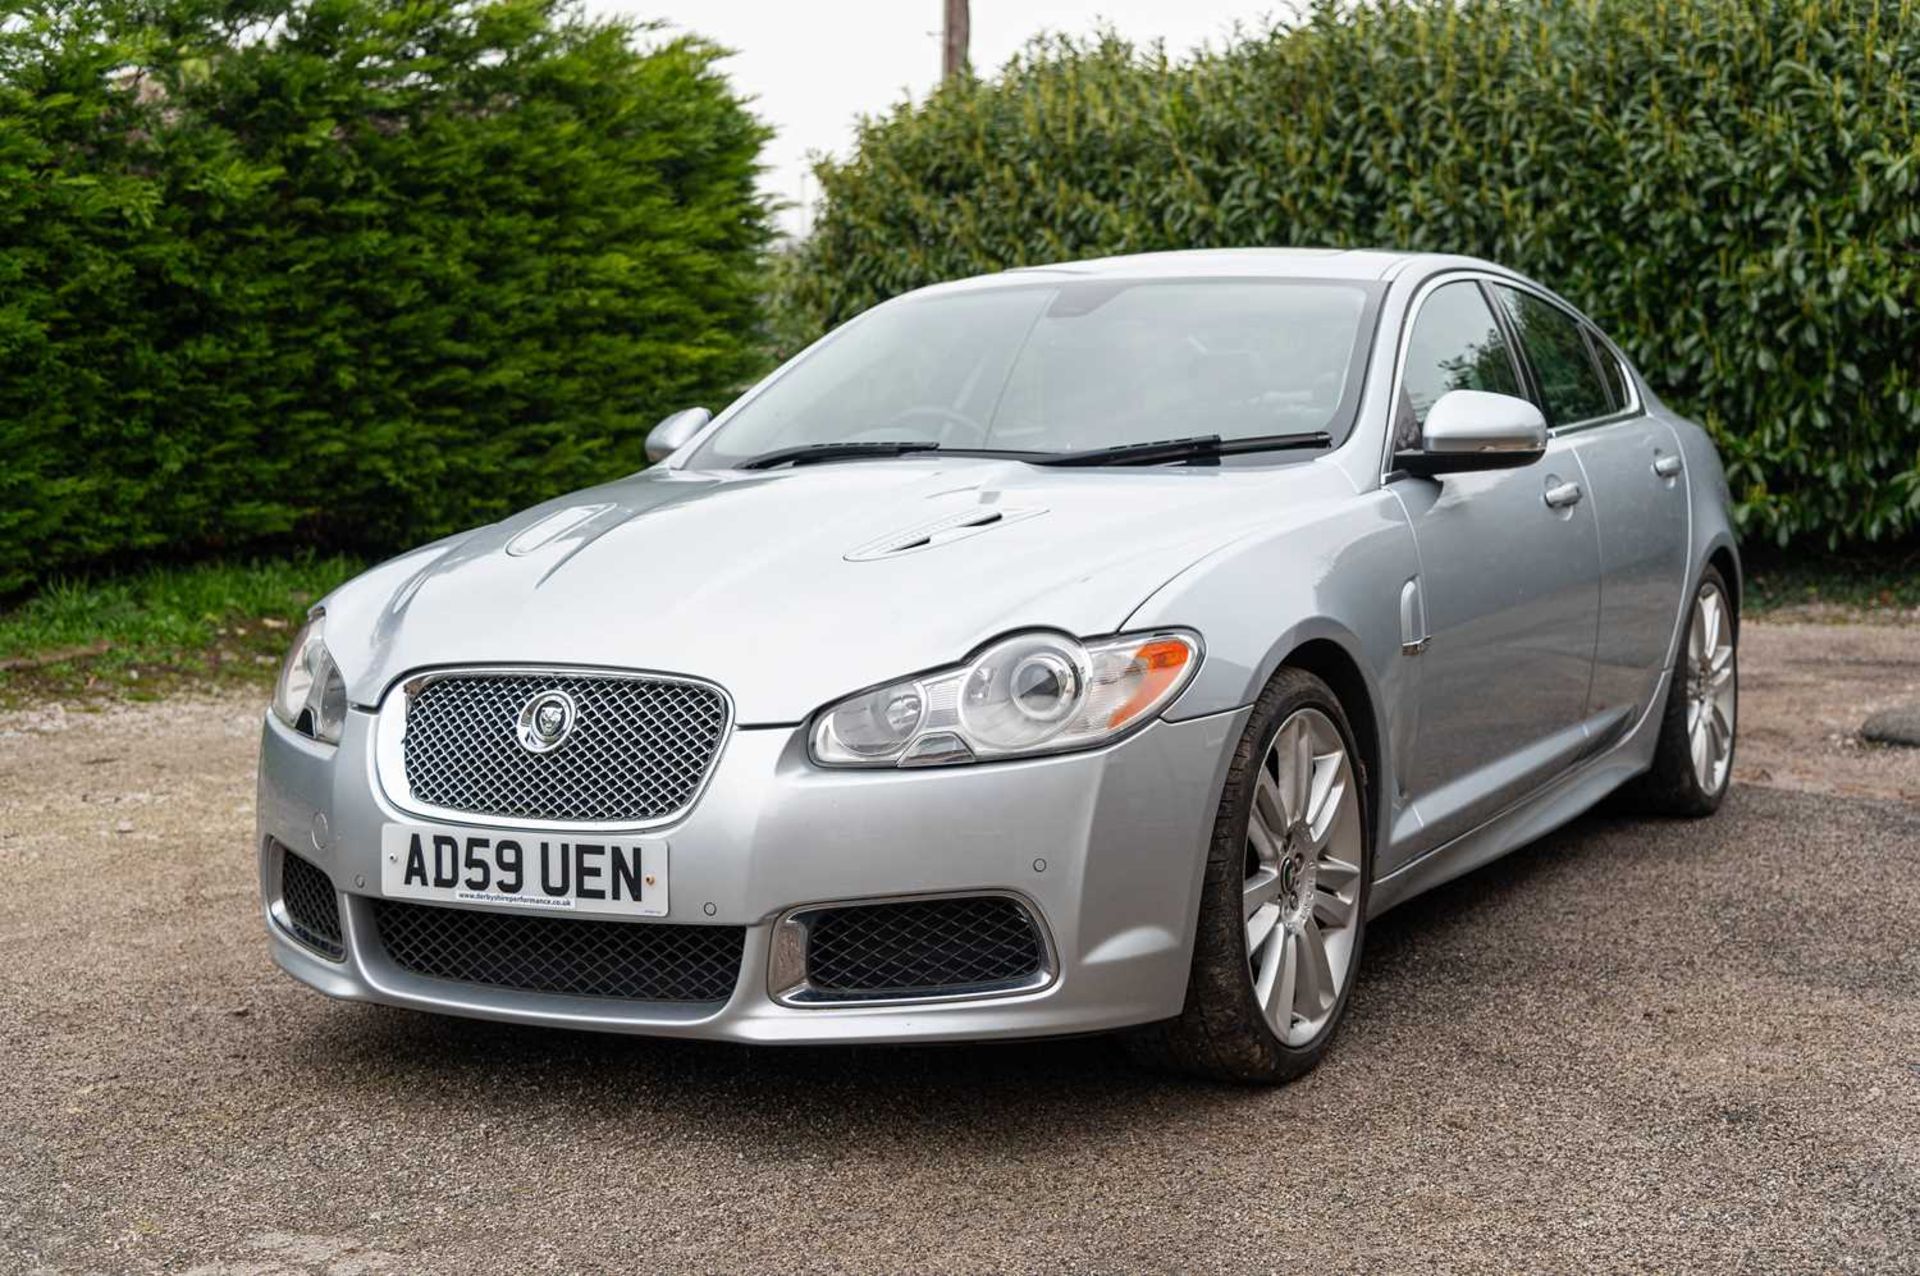 2009 Jaguar XFR Saloon 500 horsepower four-door super saloon, with full service history - Image 6 of 81